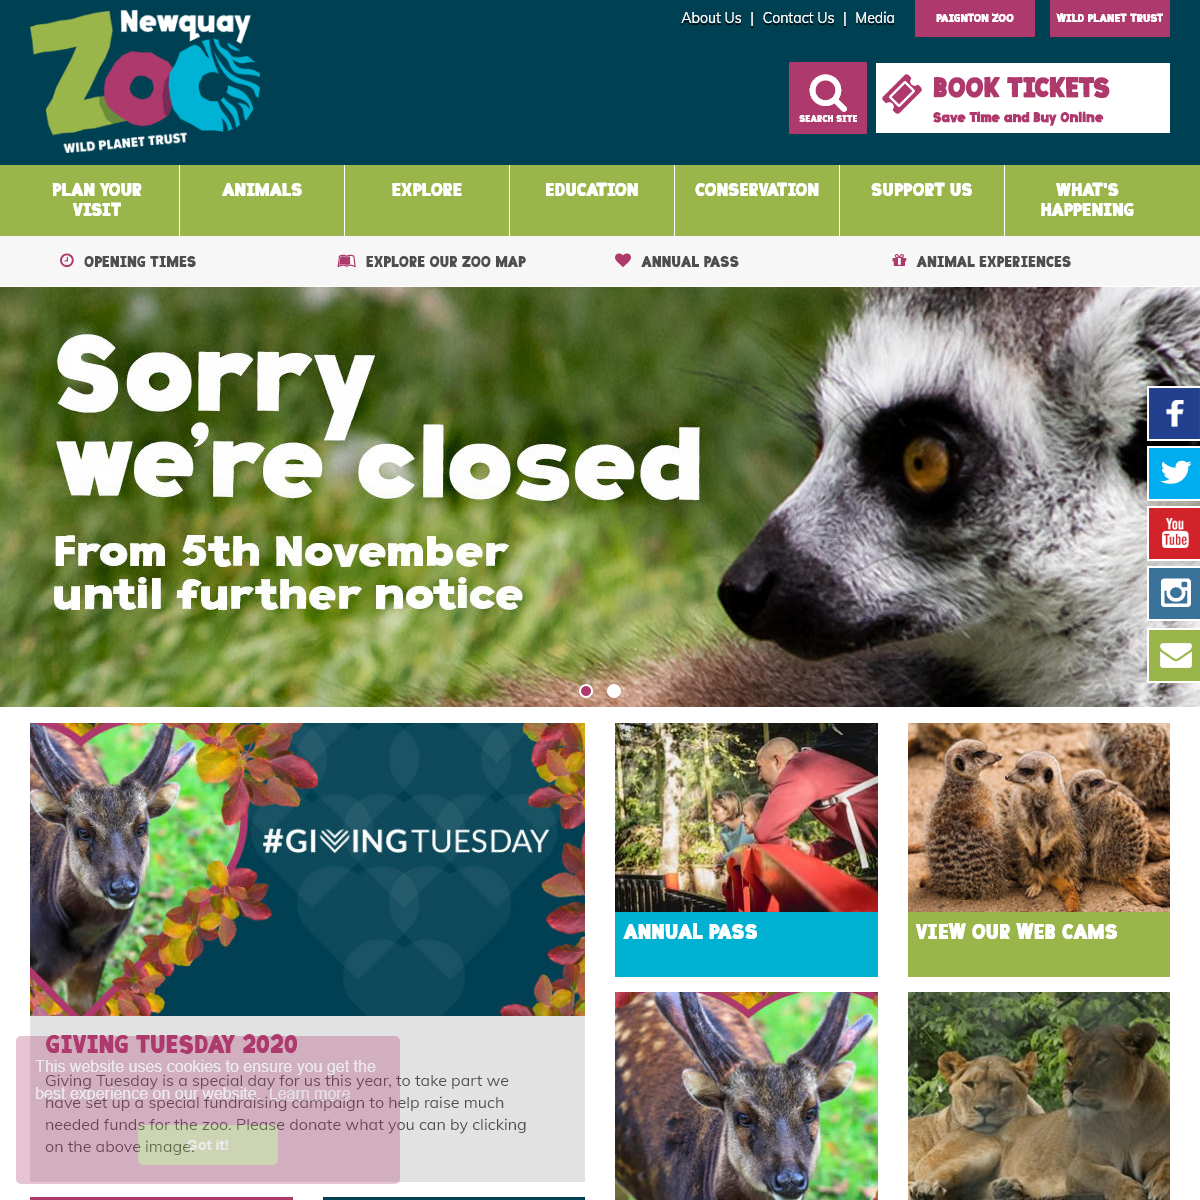 A complete backup of newquayzoo.org.uk